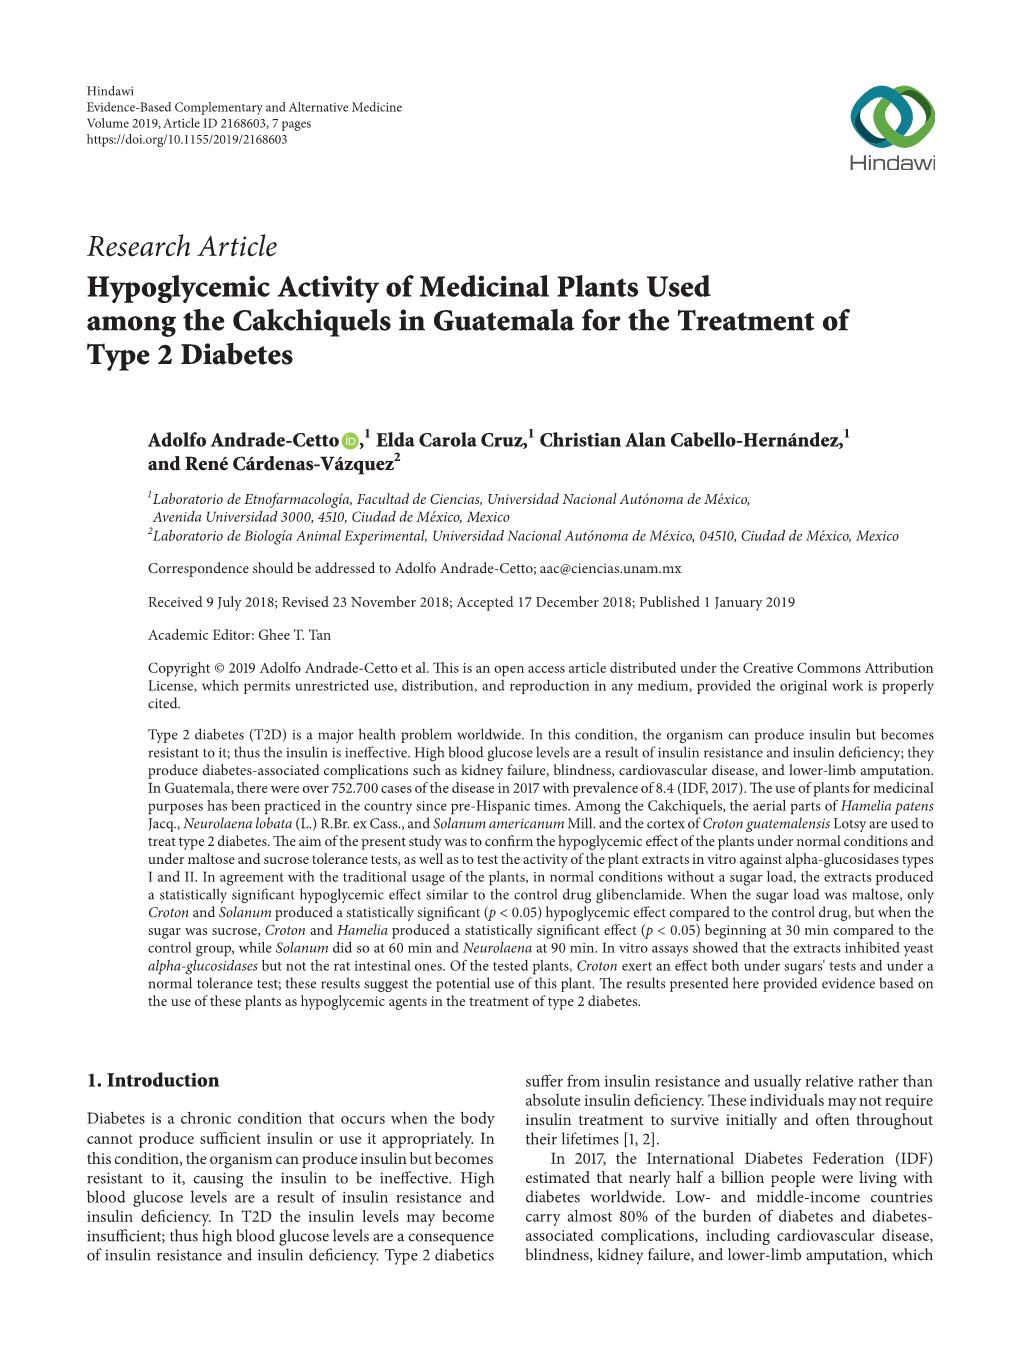 Hypoglycemic Activity of Medicinal Plants Used Among the Cakchiquels in Guatemala for the Treatment of Type 2 Diabetes